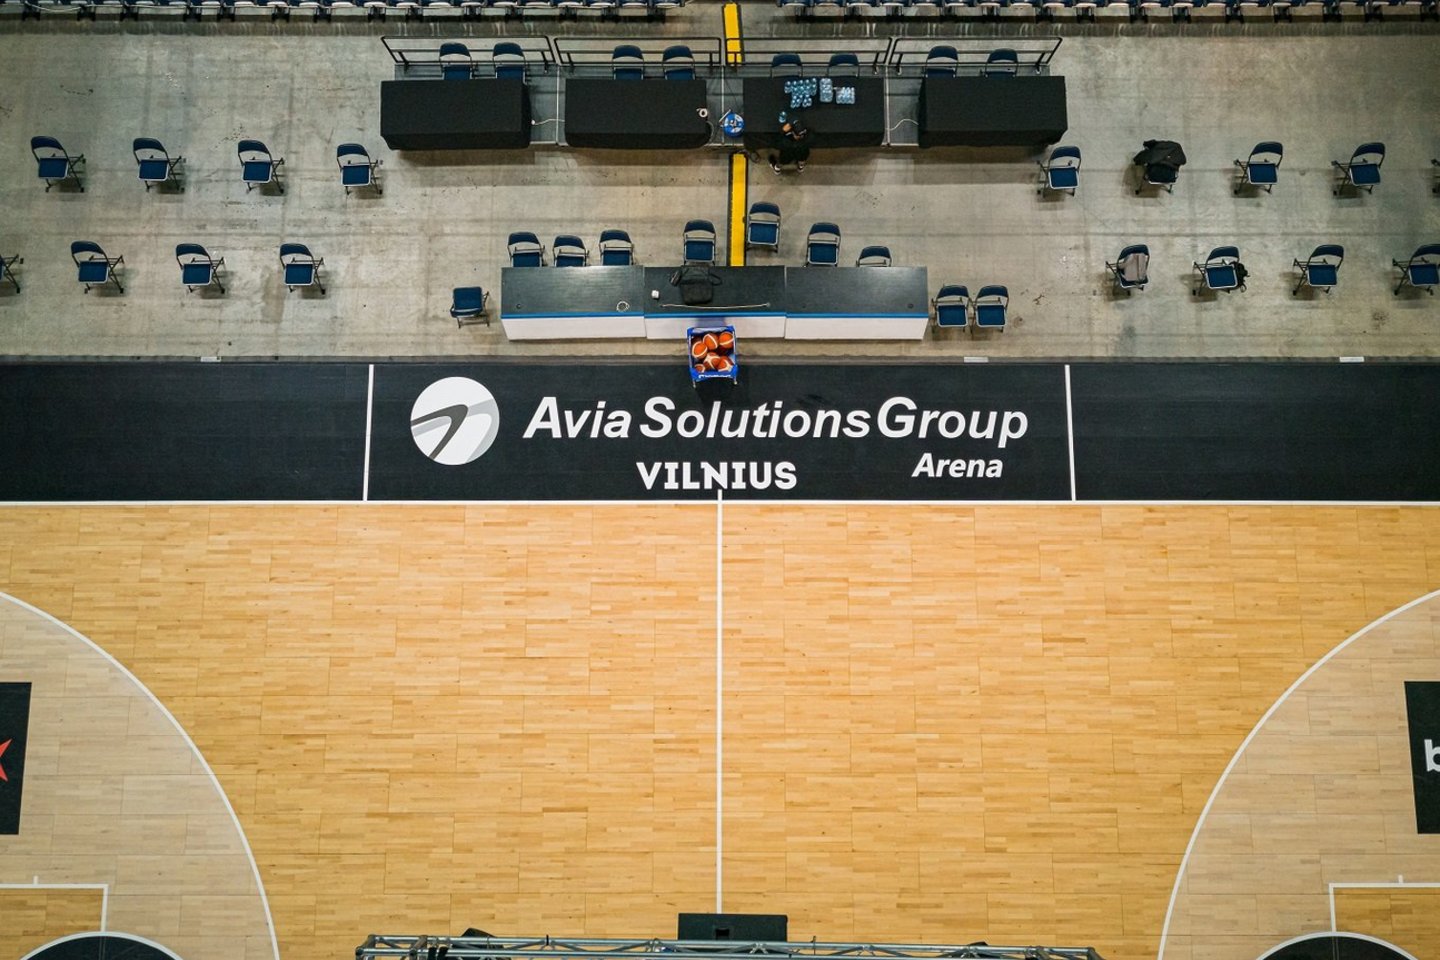 „Avia Solution goup“ arena<br> BHC nuotr.